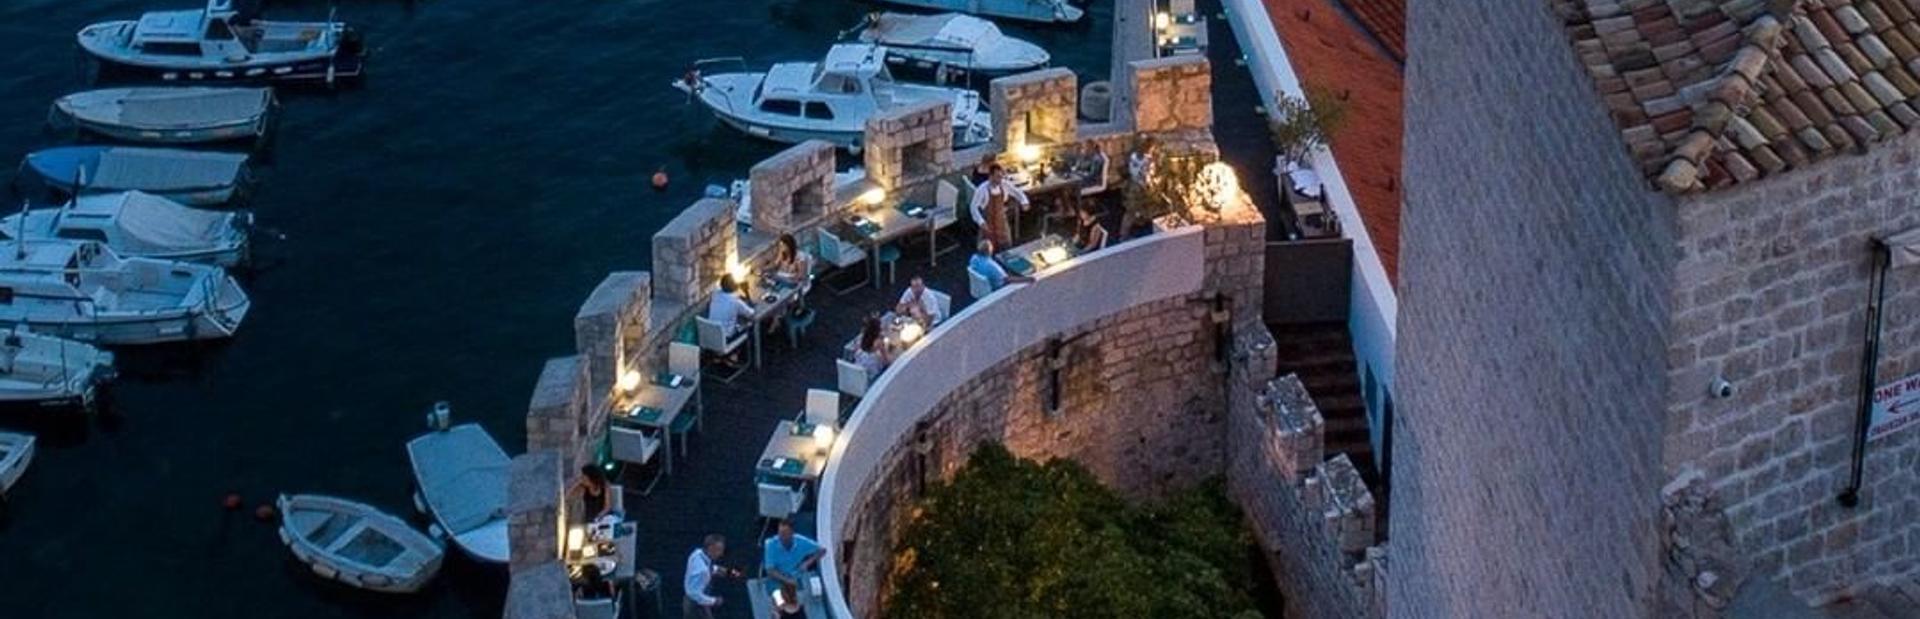 The most sensational restaurants in the Mediterranean which you can visit by yacht